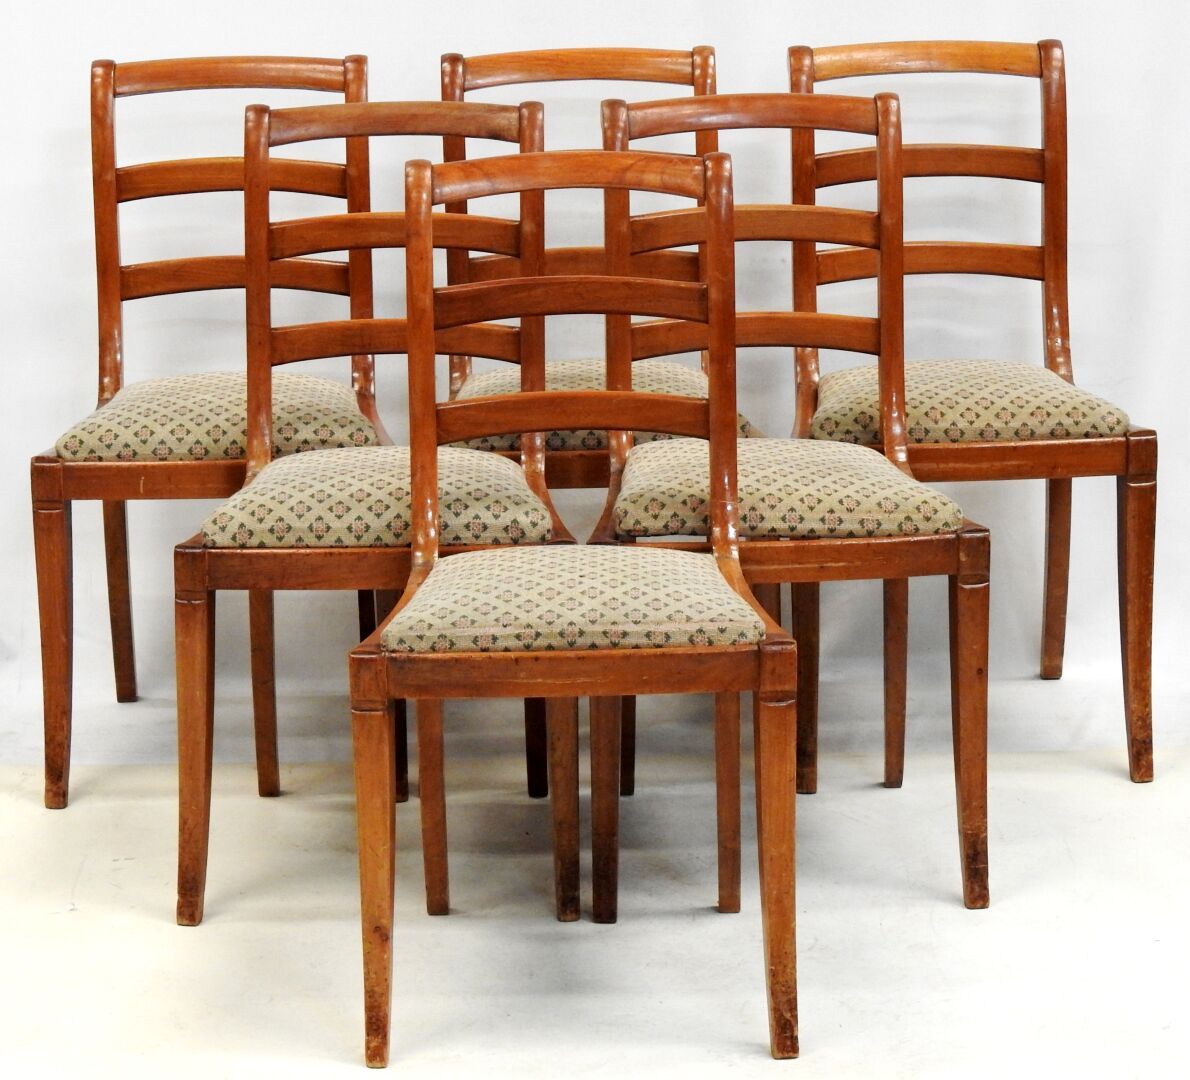 Null Suite of six chairs with openwork backs in natural wood

Wear.